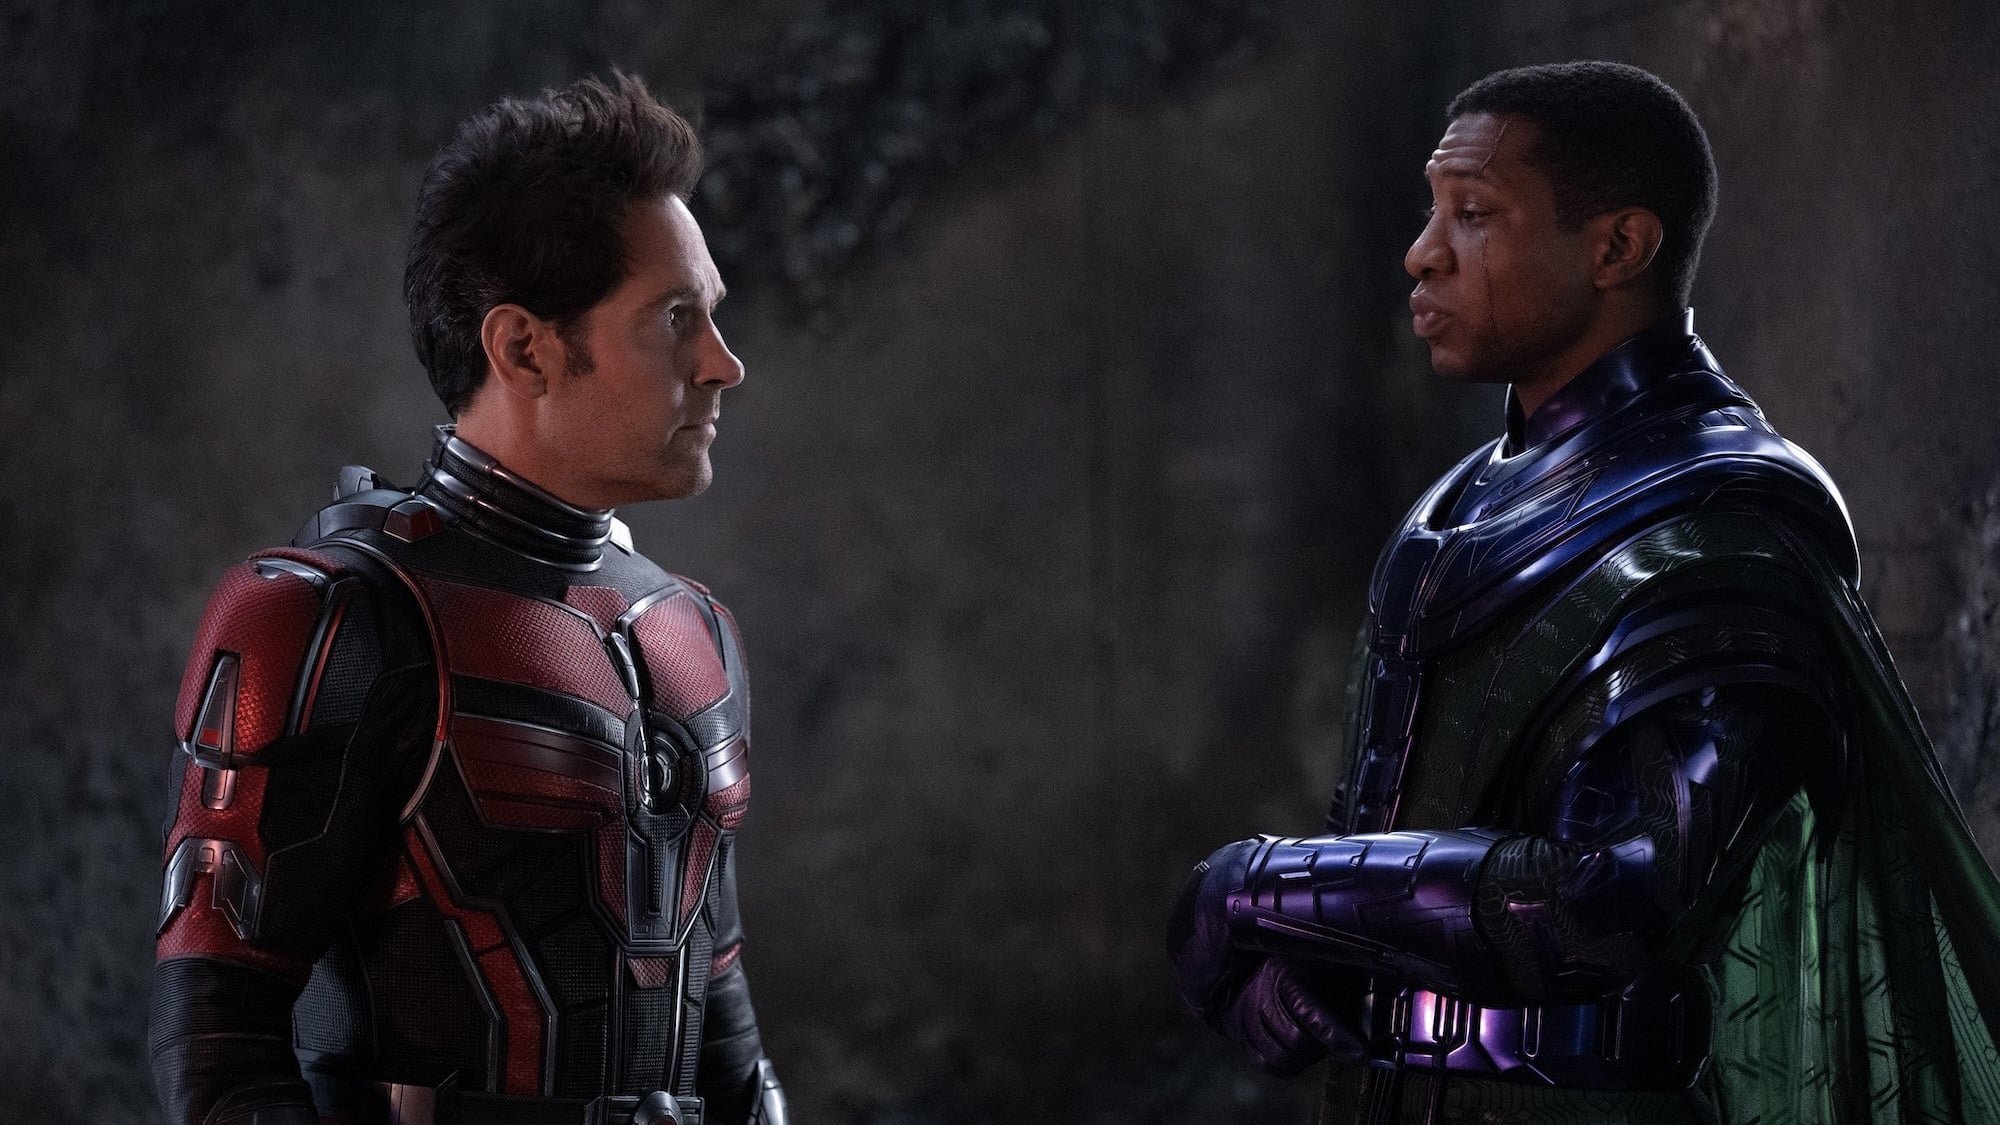 Only one Marvel film has performed worse. 'Ant-Man and the Wasp: Quantumania' is facing criticism or negative reactions